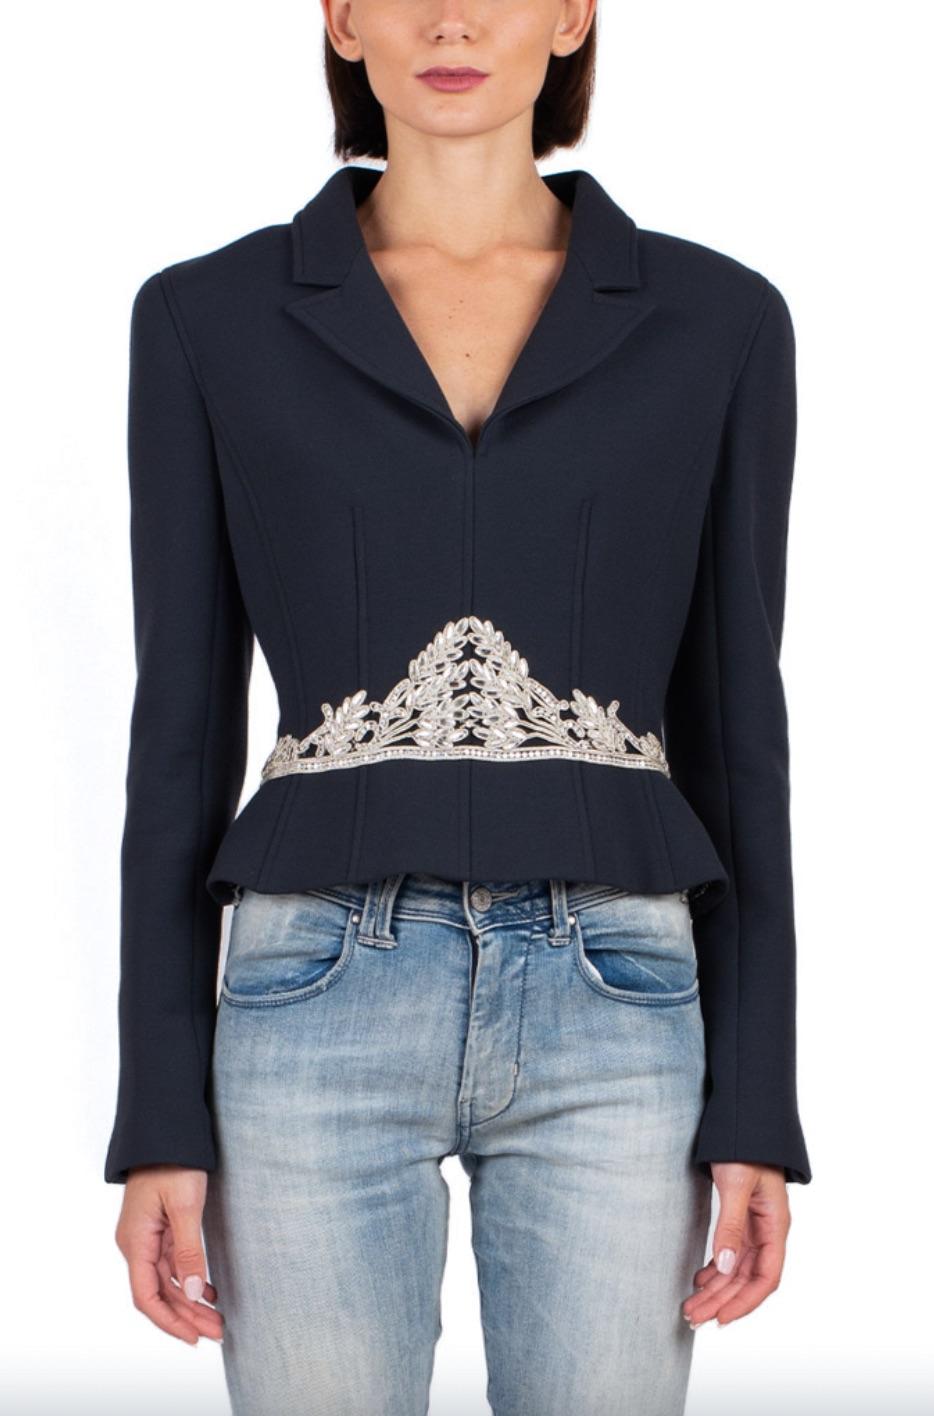 Exquisite navy jacket with silver tiara motives from the Chanel Fall 2002 collection. Royal, Haute Couture-like look! This breathtaking jacket has a fitted corset-like cut, concealed back zip closure, tiara-shape crystal embellishments at the